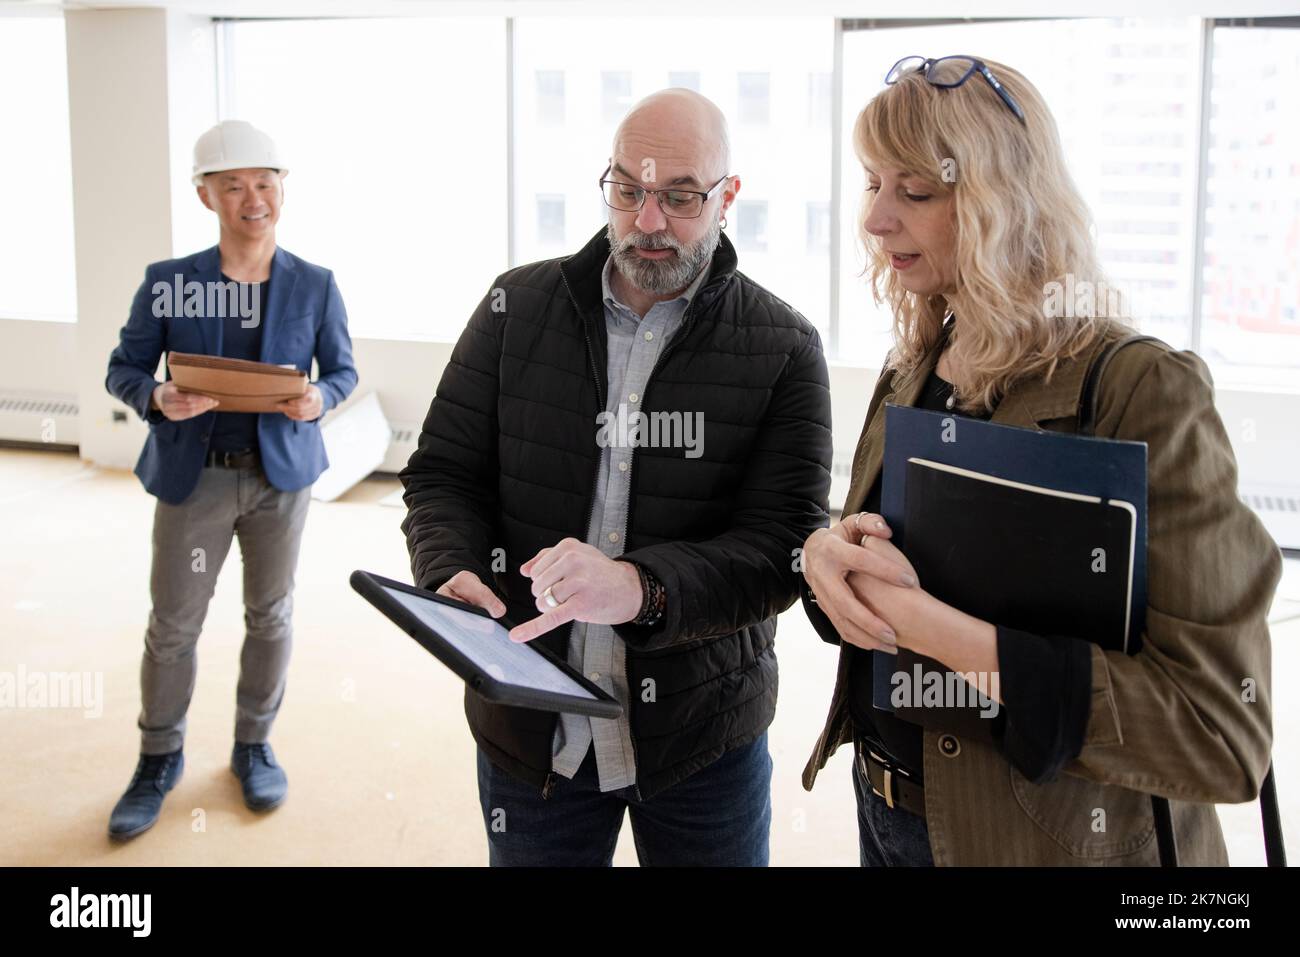 Business partners looking at office remodelling plans on tablet Stock Photo